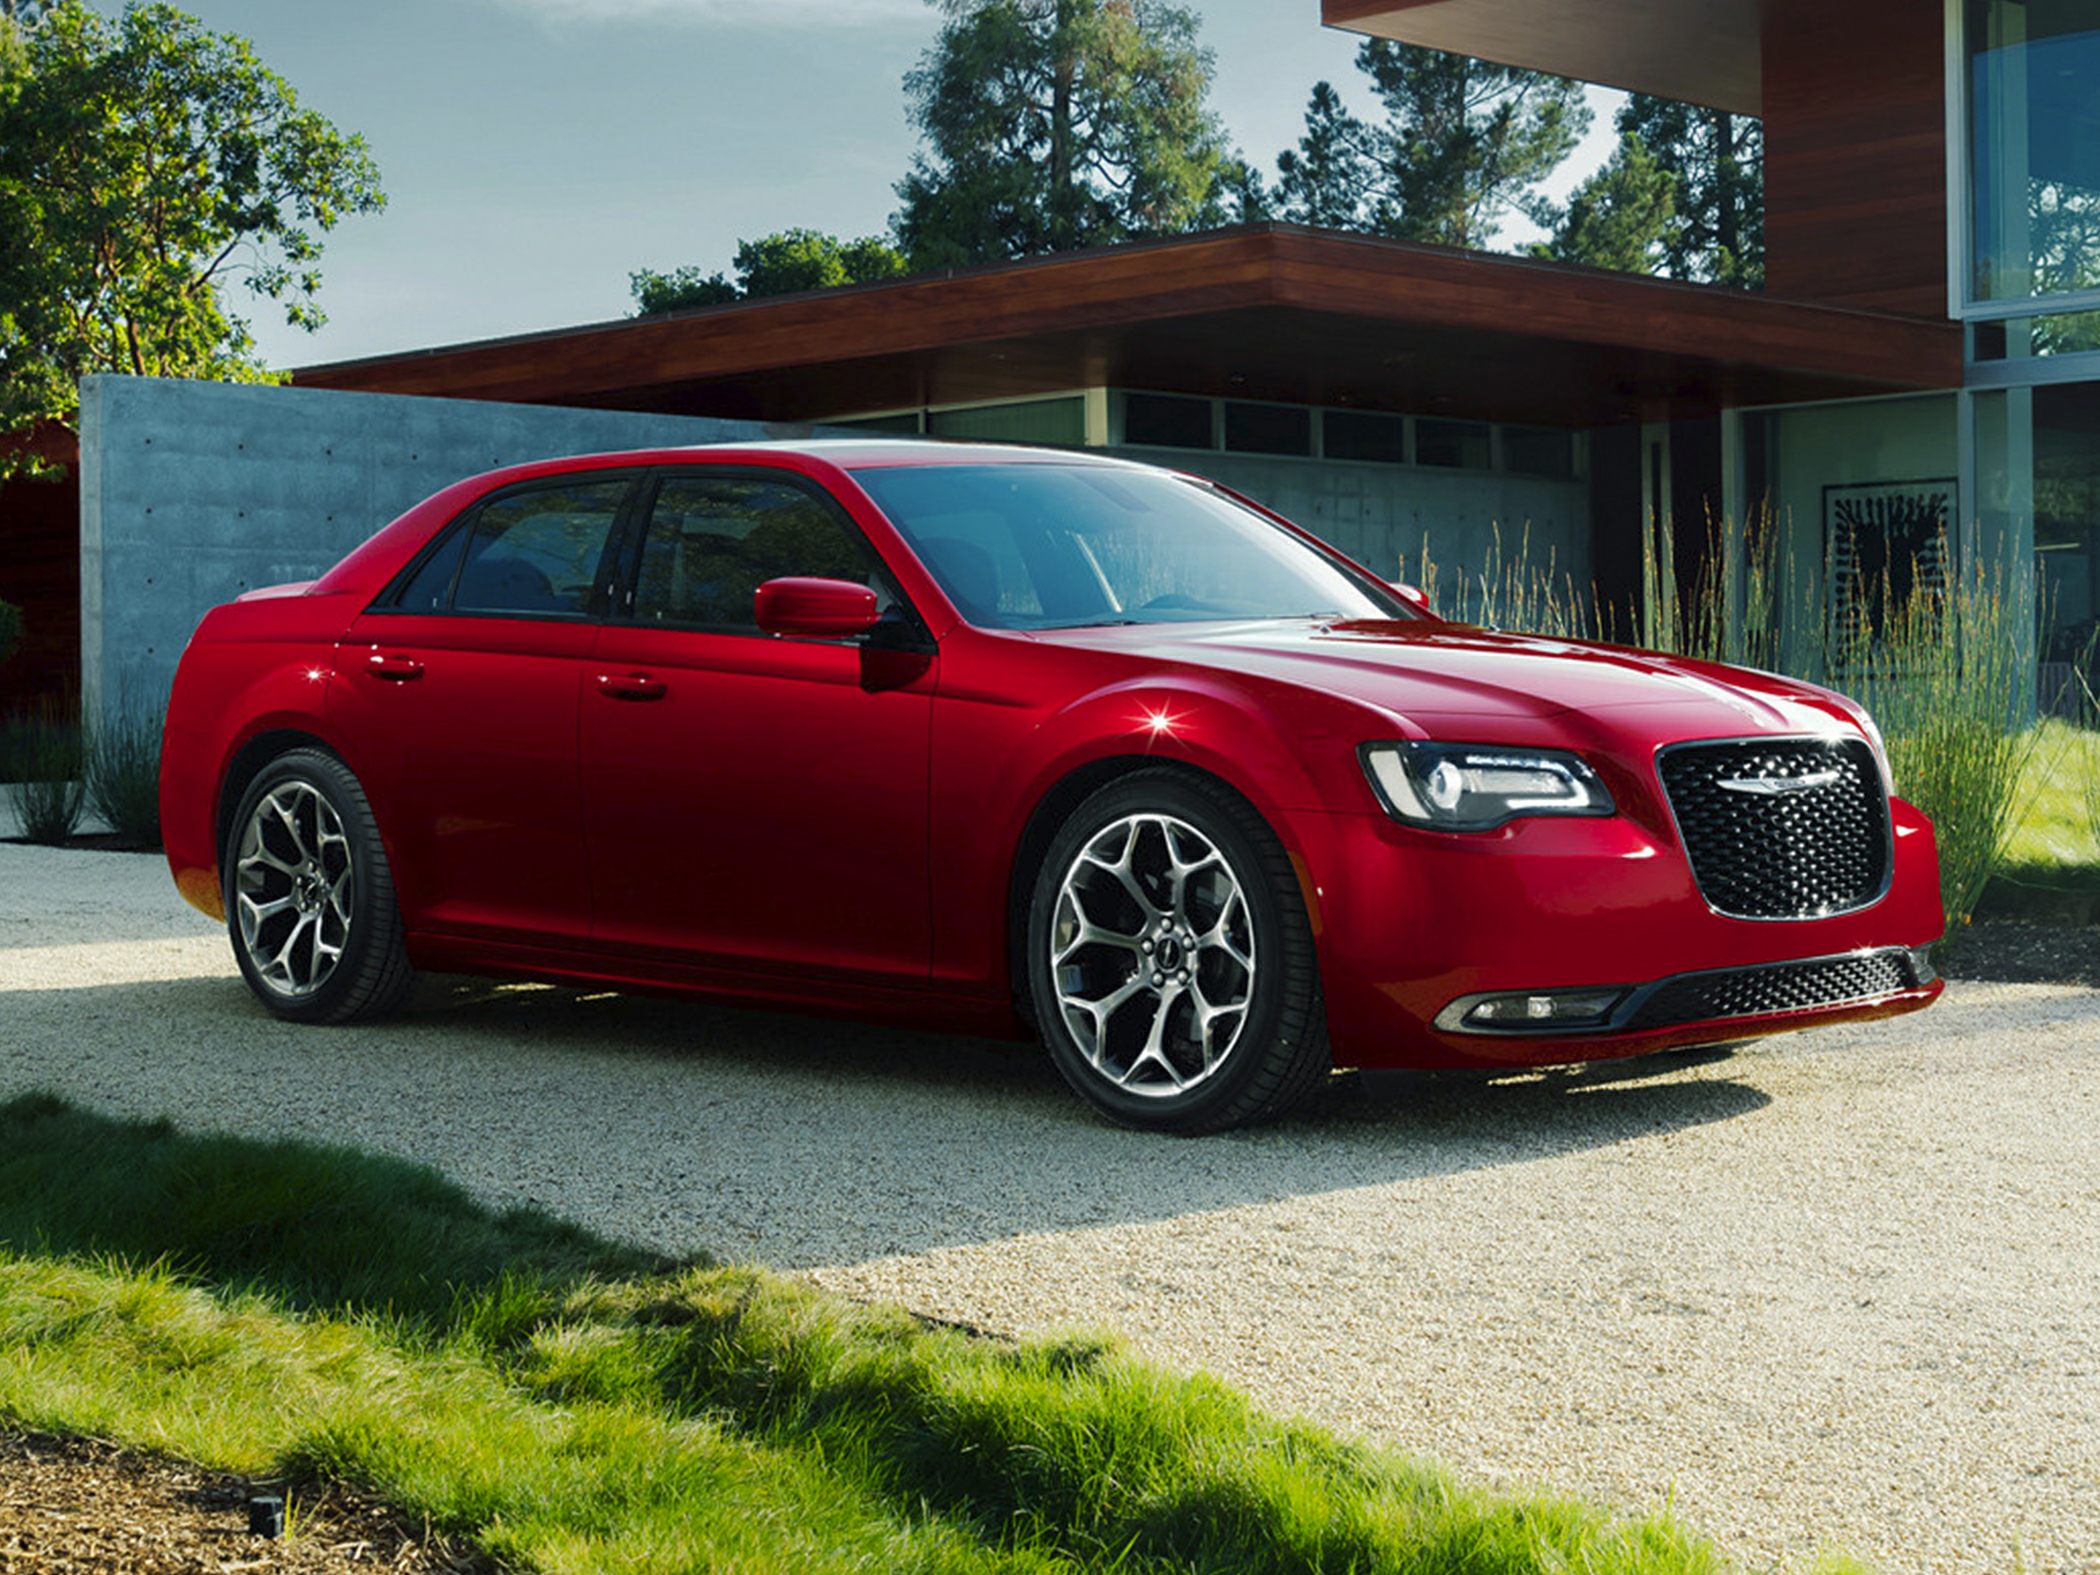 2018-chrysler-300-deals-prices-incentives-leases-overview-carsdirect